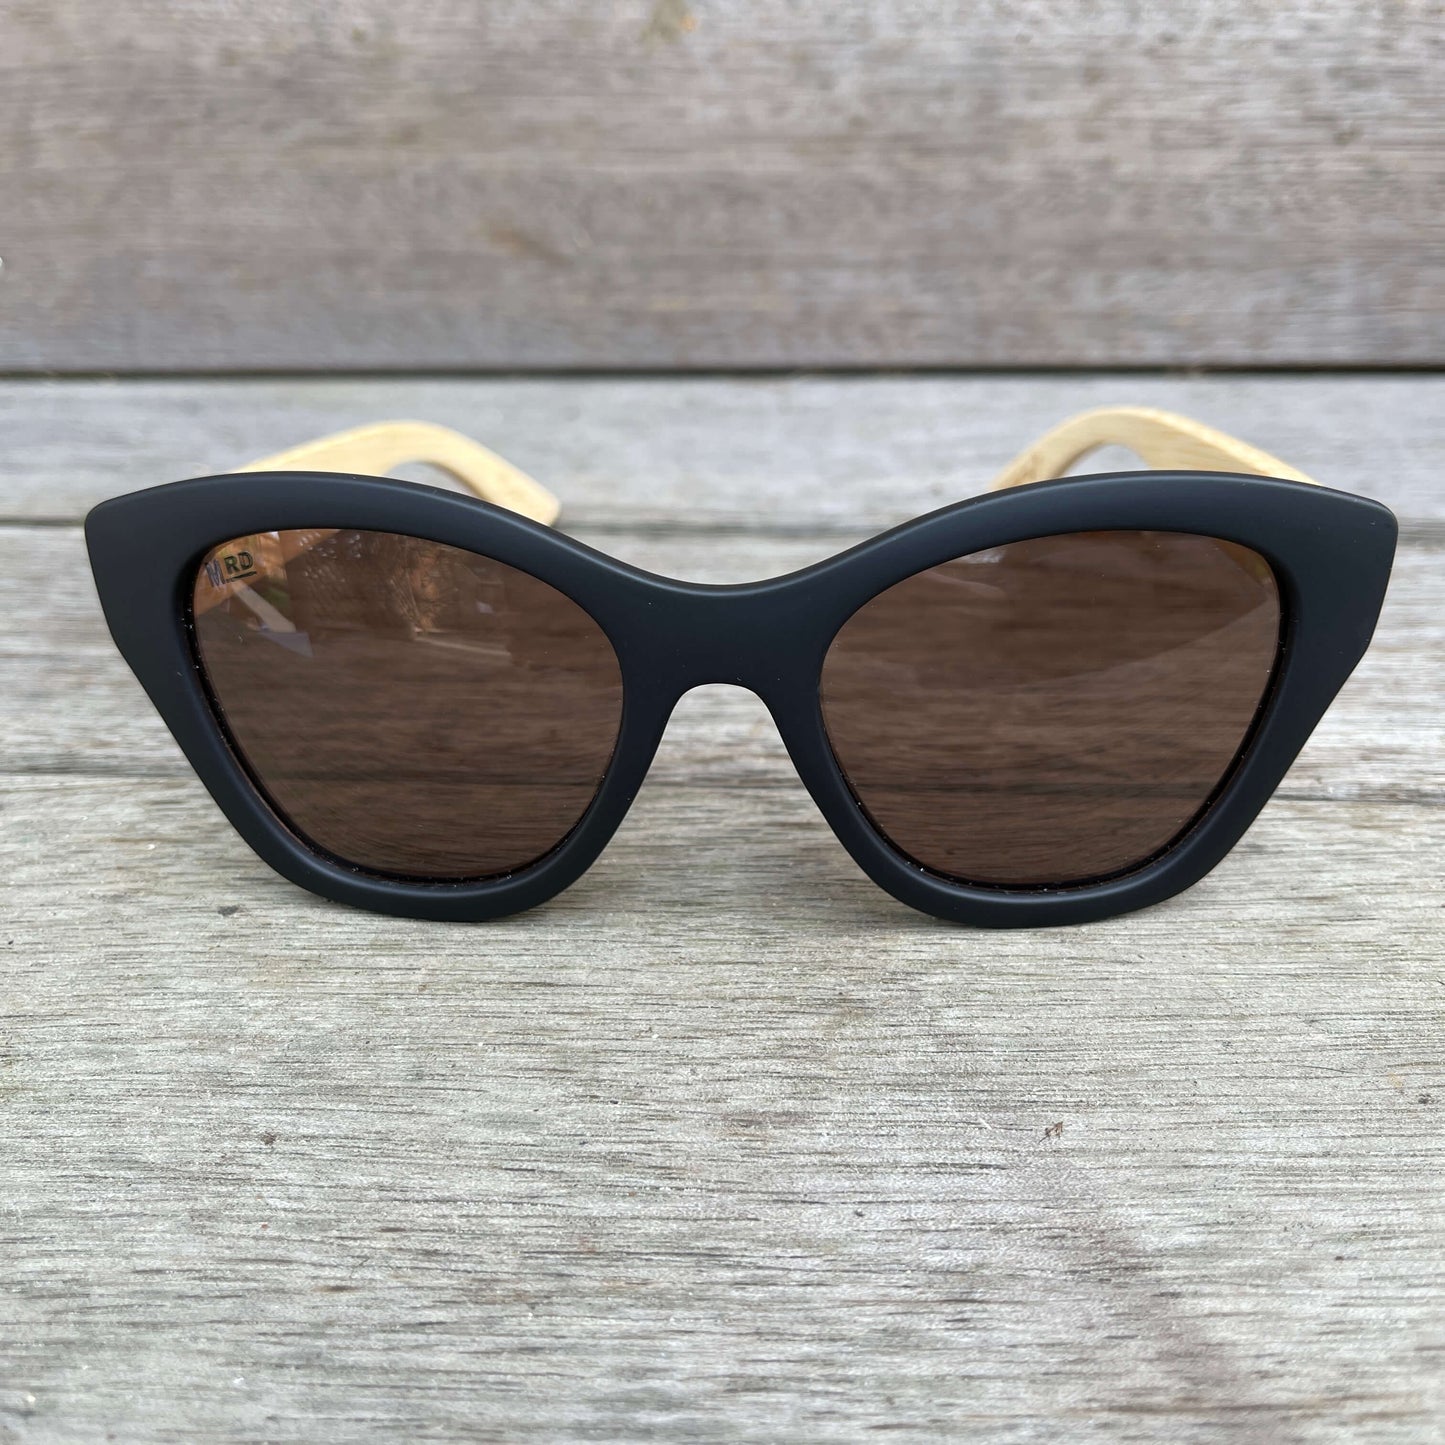 Womens sunglasses with black frames and wooden arms, in an Audrey Hepburn style.